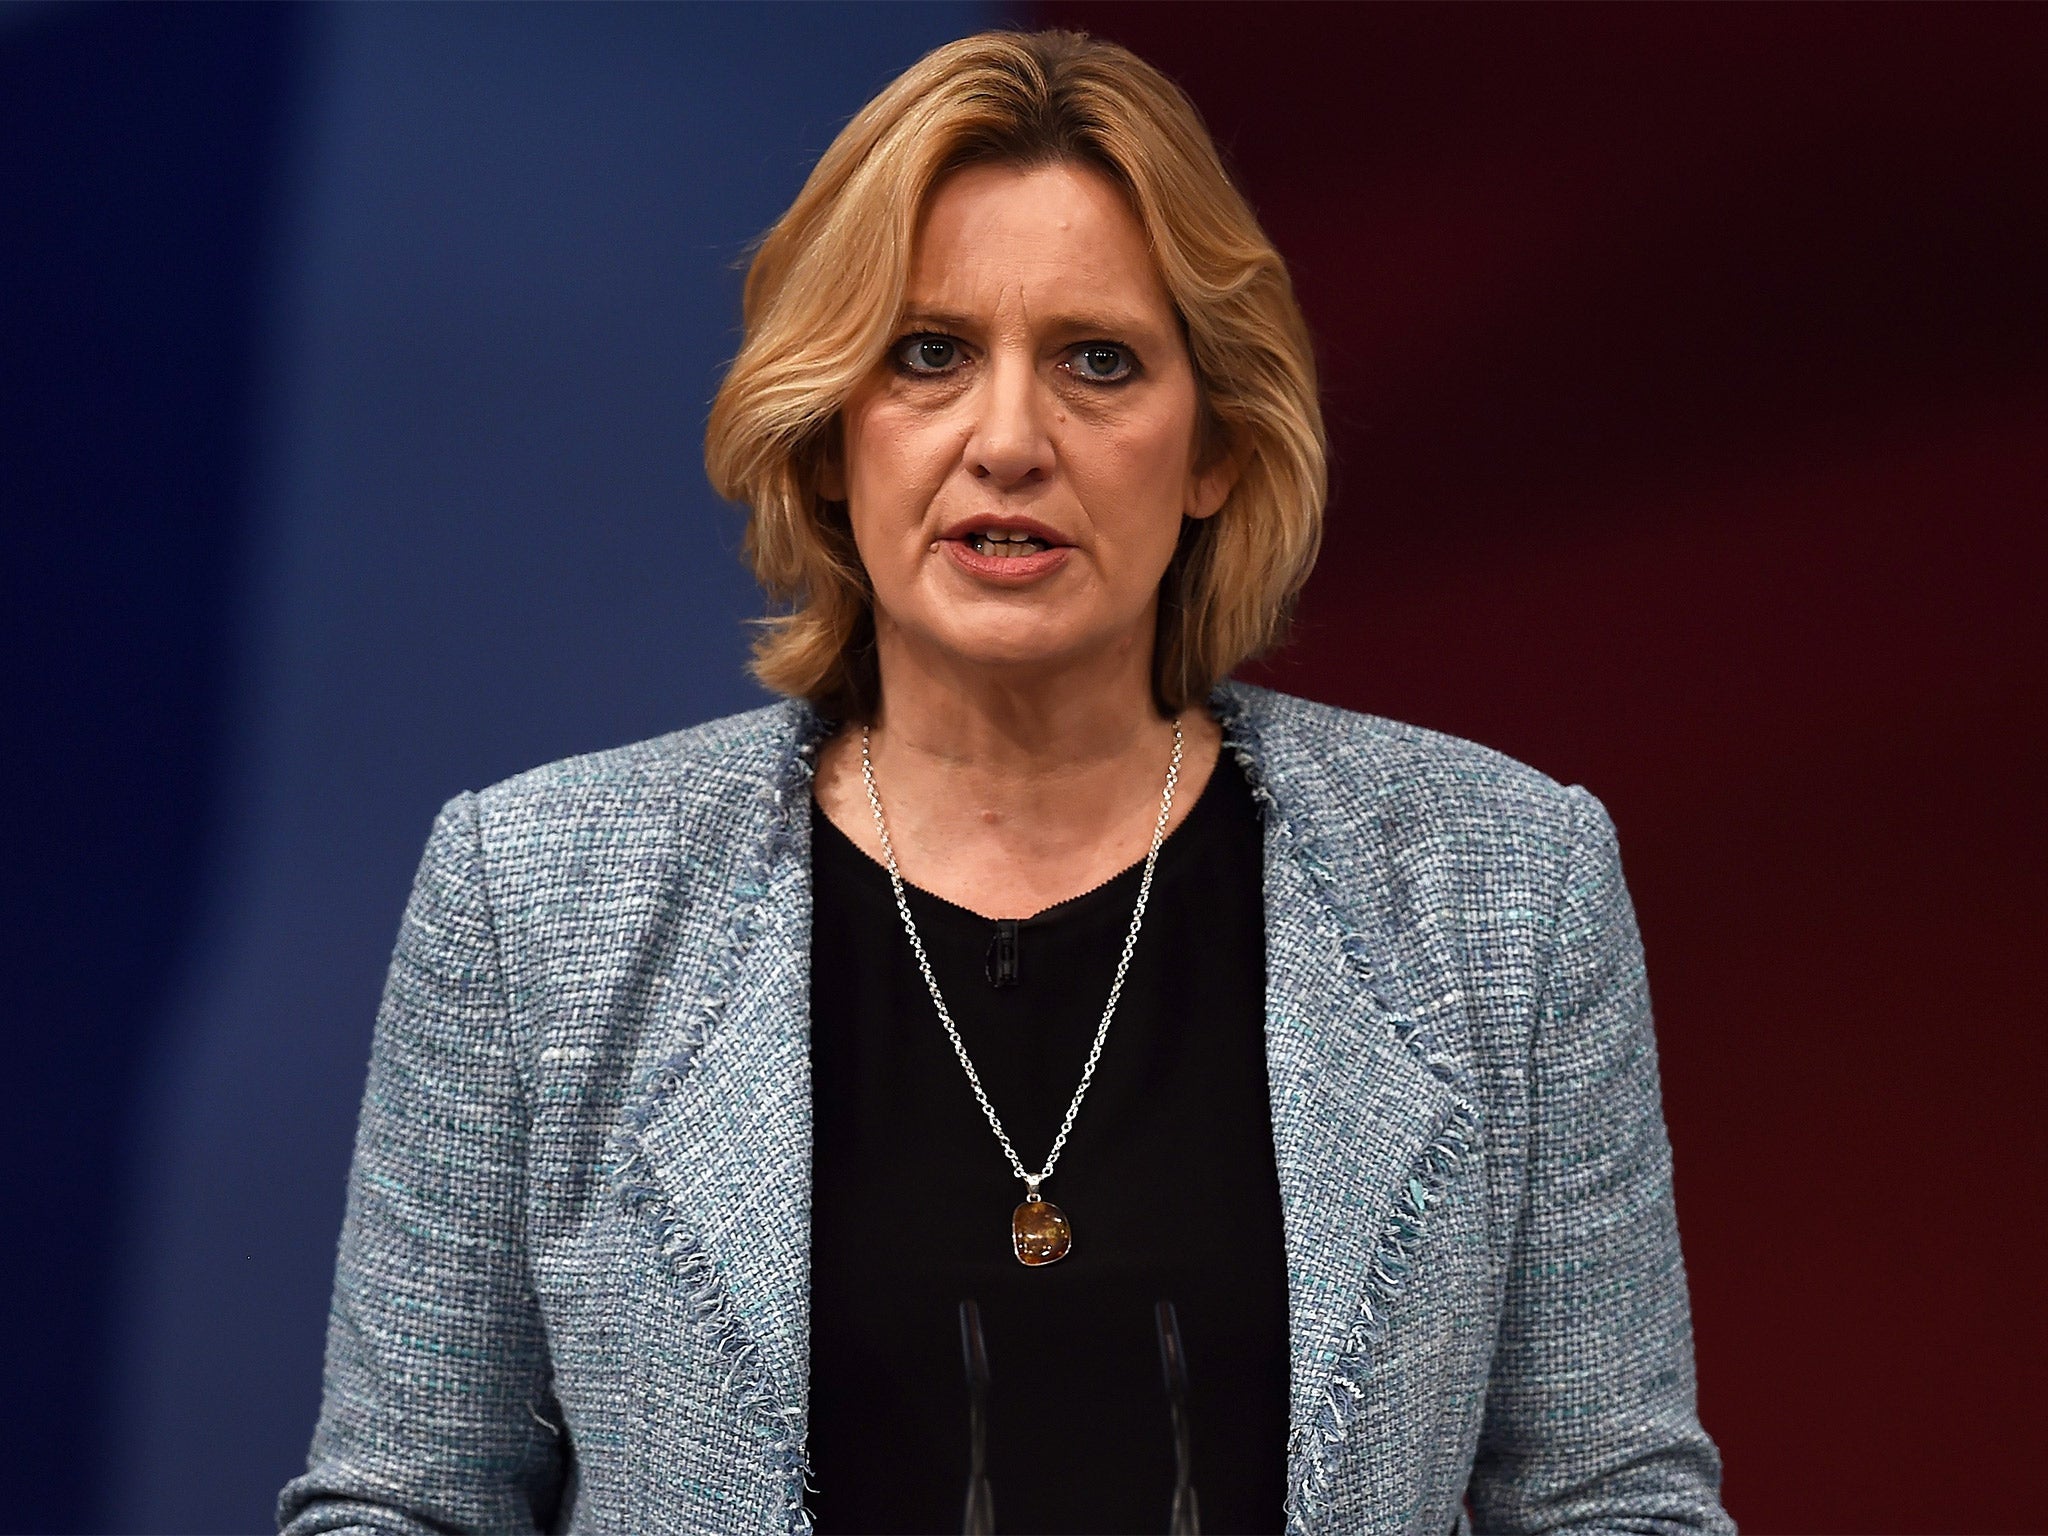 Amber Rudd, the Energy and Climate Change Secretary, will play a key role at the summit